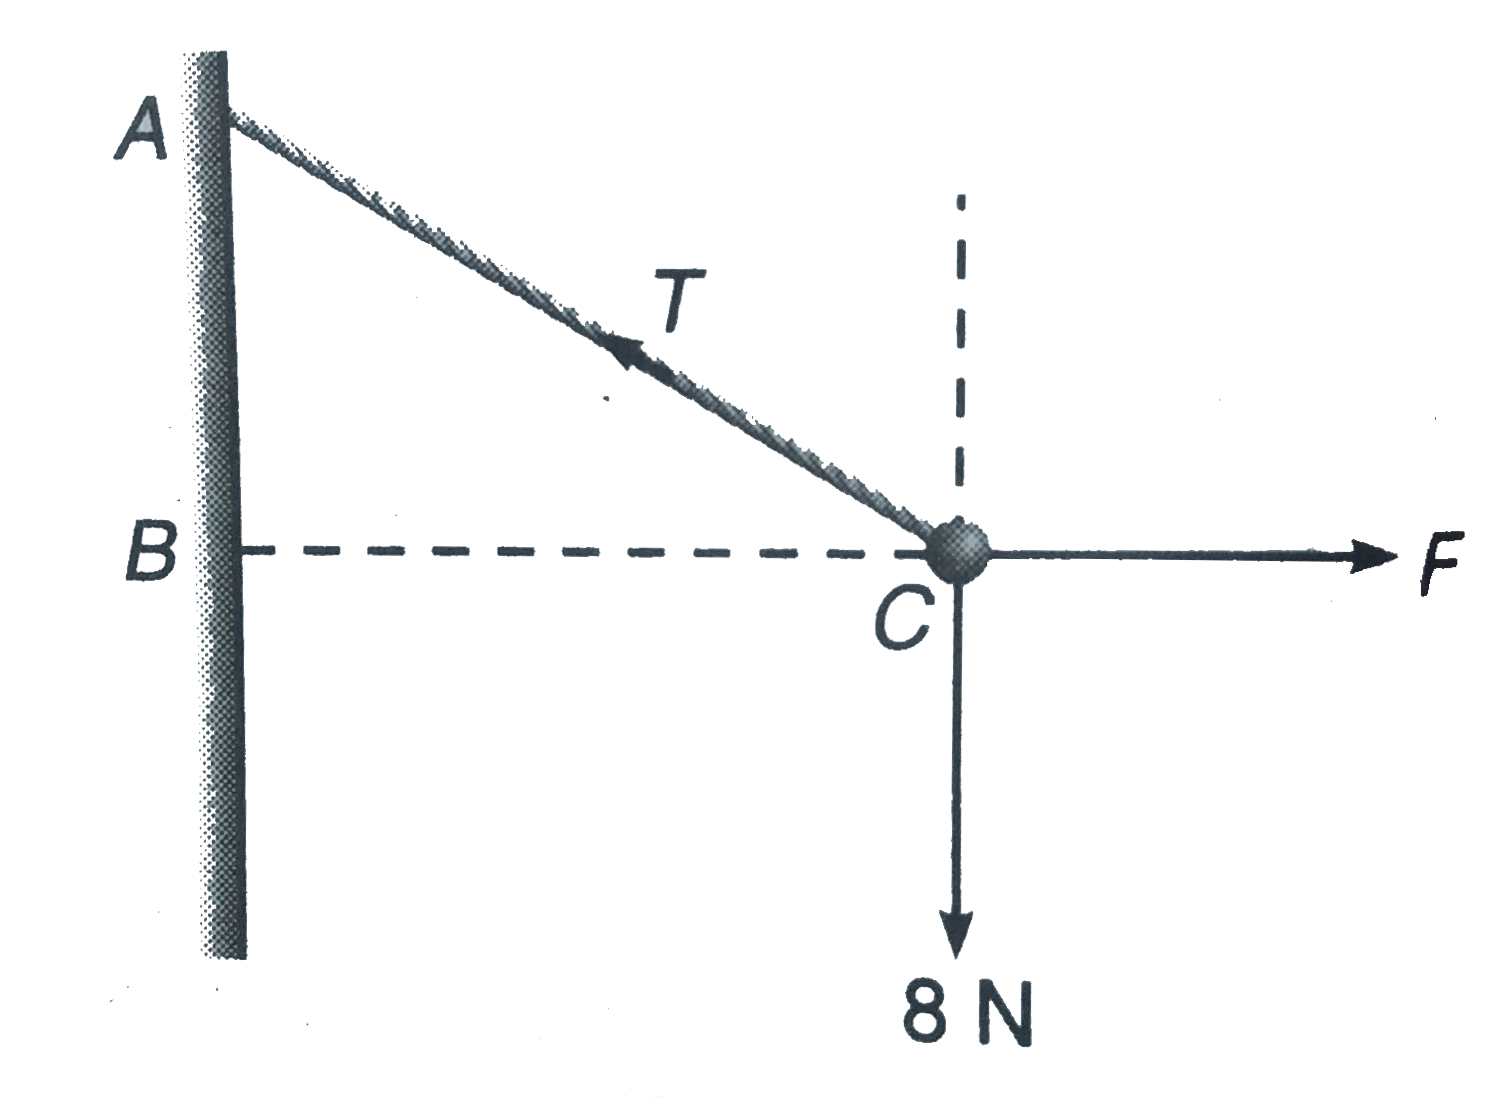 One end of a string 0.5 m long is fixed to a point A and the other end is fastened to a small object of weight 8 N. The object is pulled aside by a horizontal force F, until it is 0.3 m from the vertical through A.Find the magnitudes of the tension T in the string and force F.